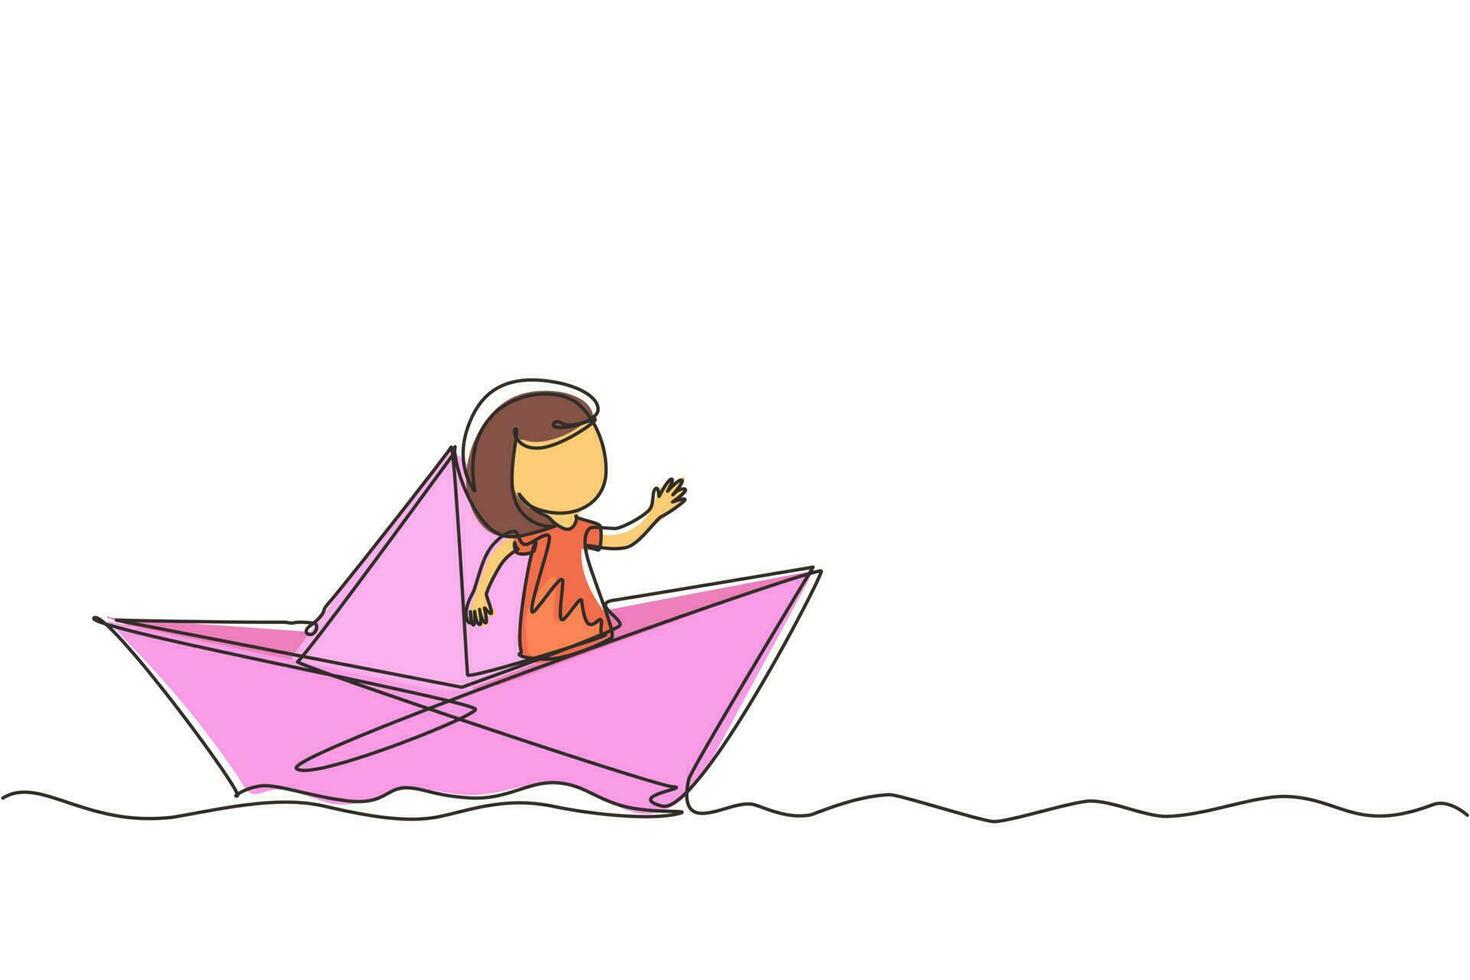 Single continuous line drawing cute smiling little girl sailing on paper boat. Happy smiling kid having fun and playing sailor in imaginary world. One line draw graphic design vector illustration